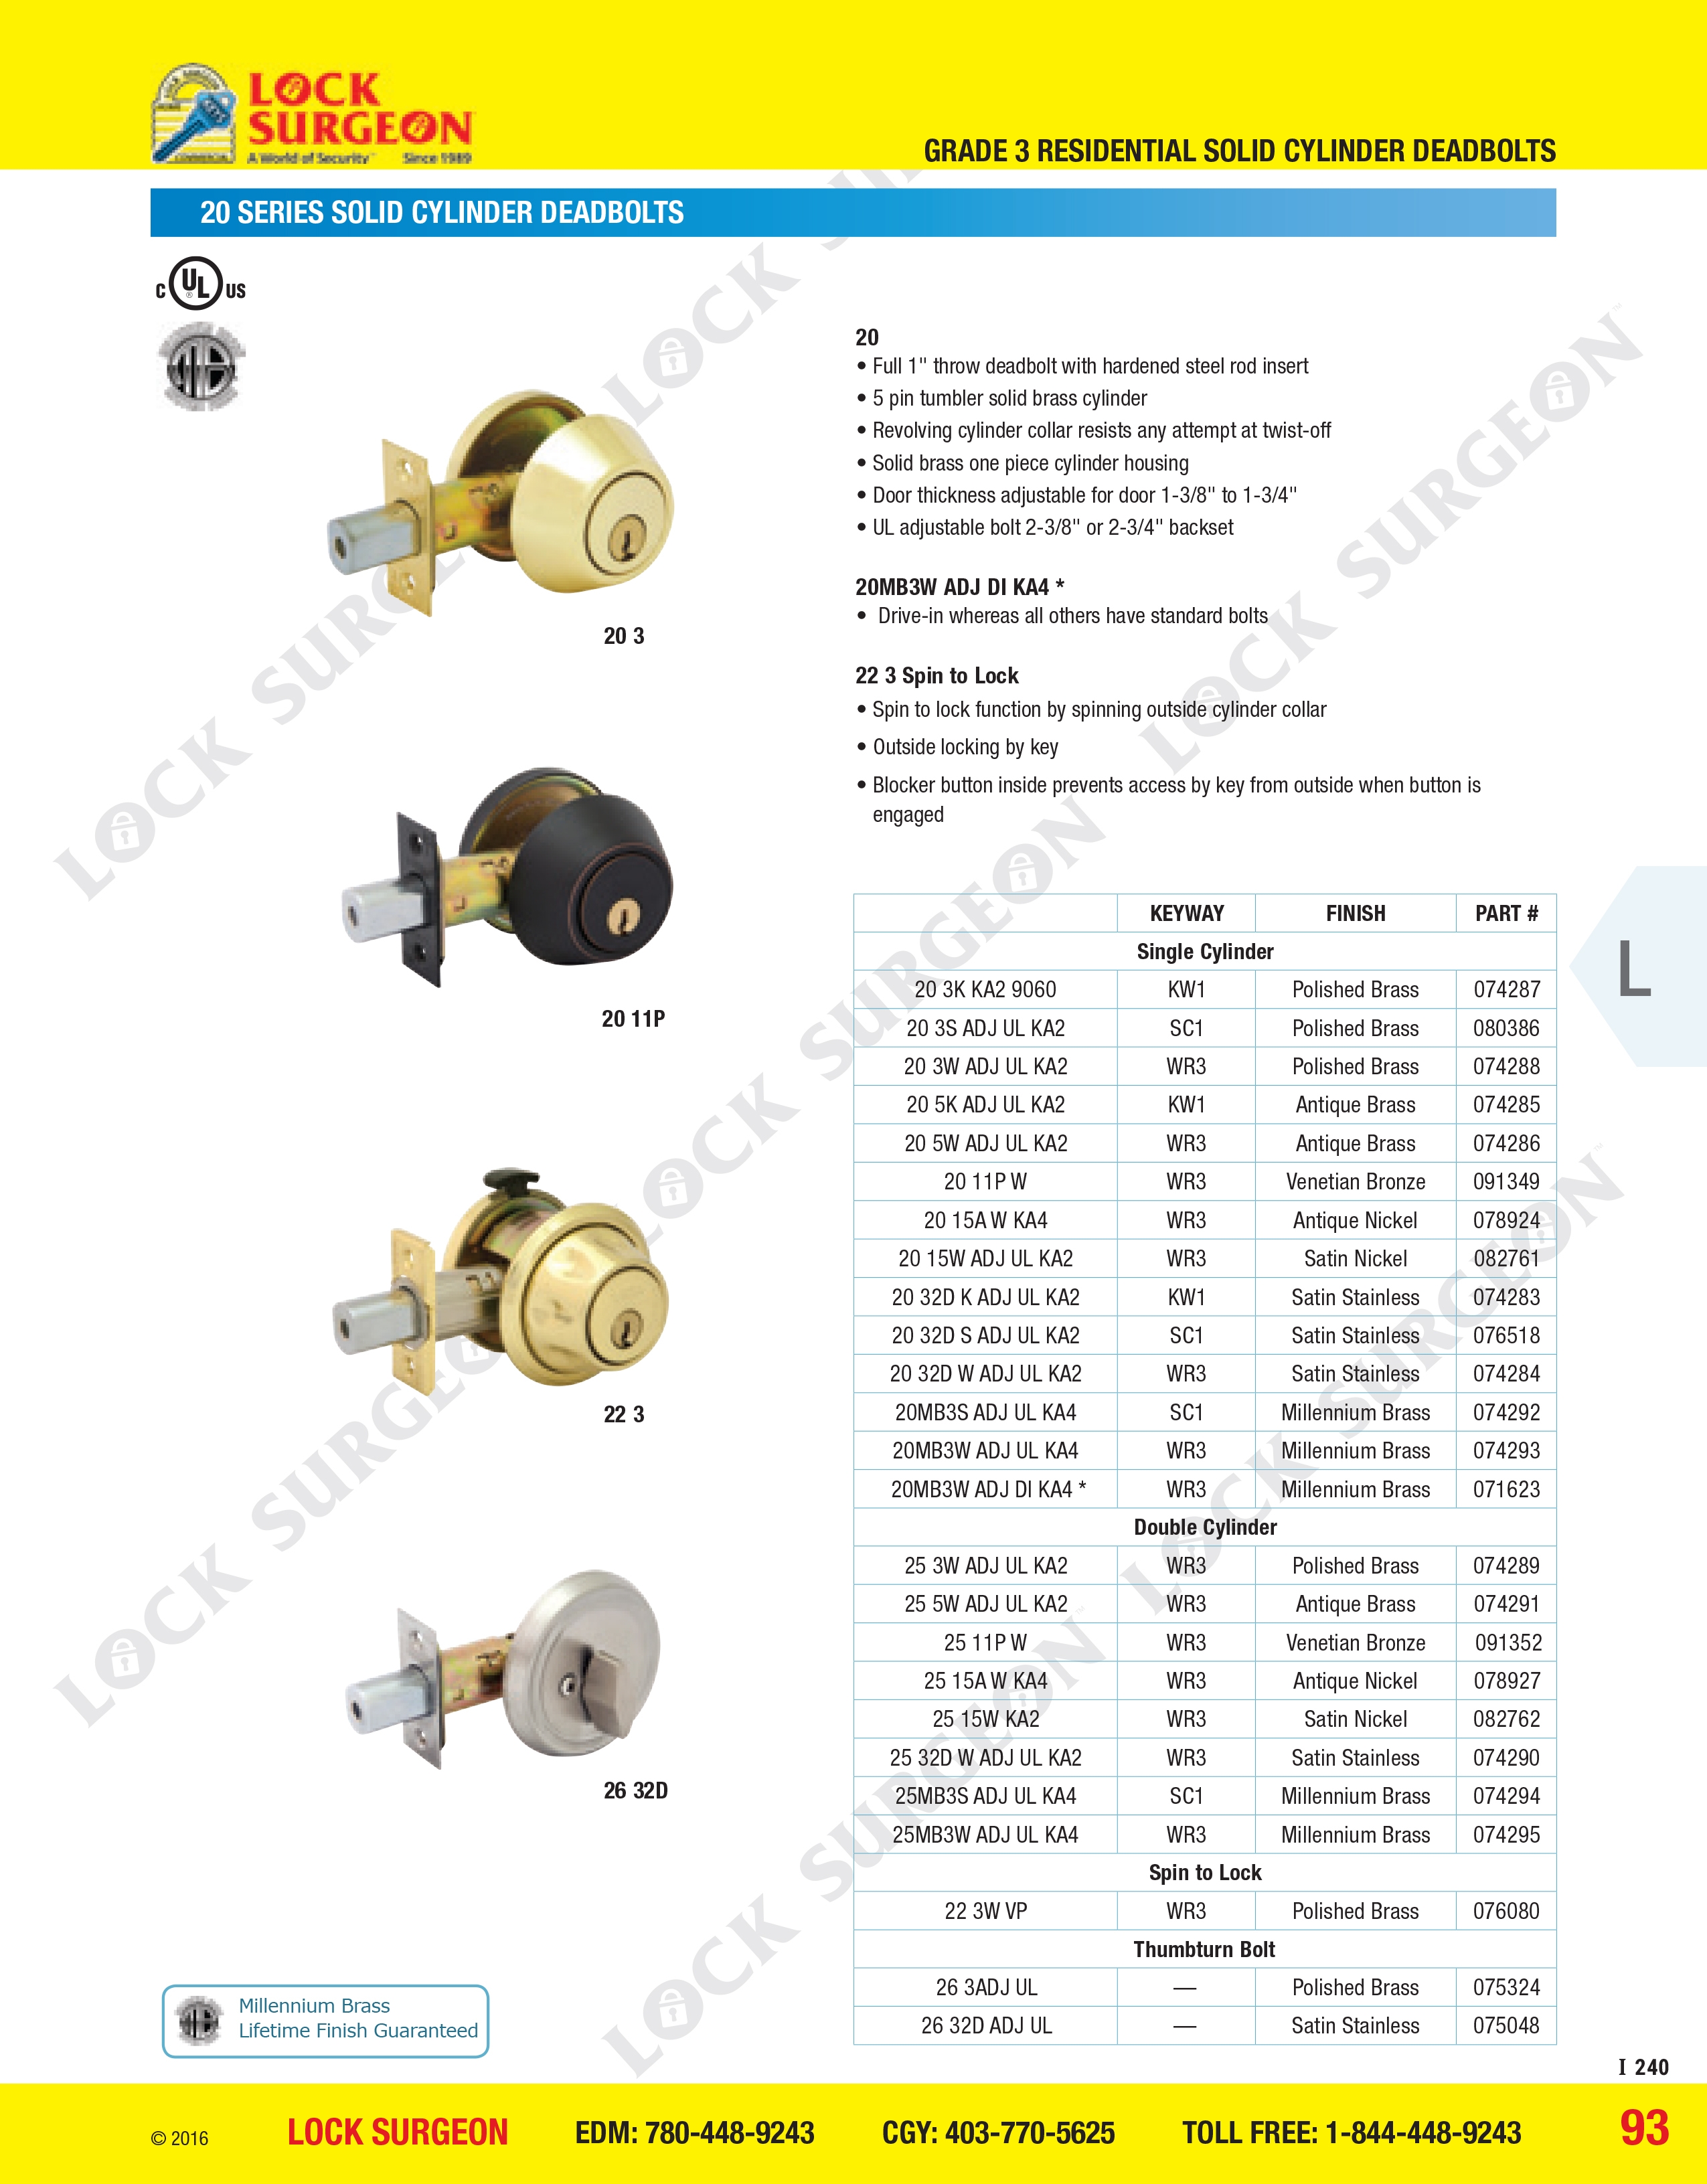 top of grade deadbolts come in silver, brass, nickle, stainless steel and venetian bronze colours, single-sided cylindar or double-sided cylindar